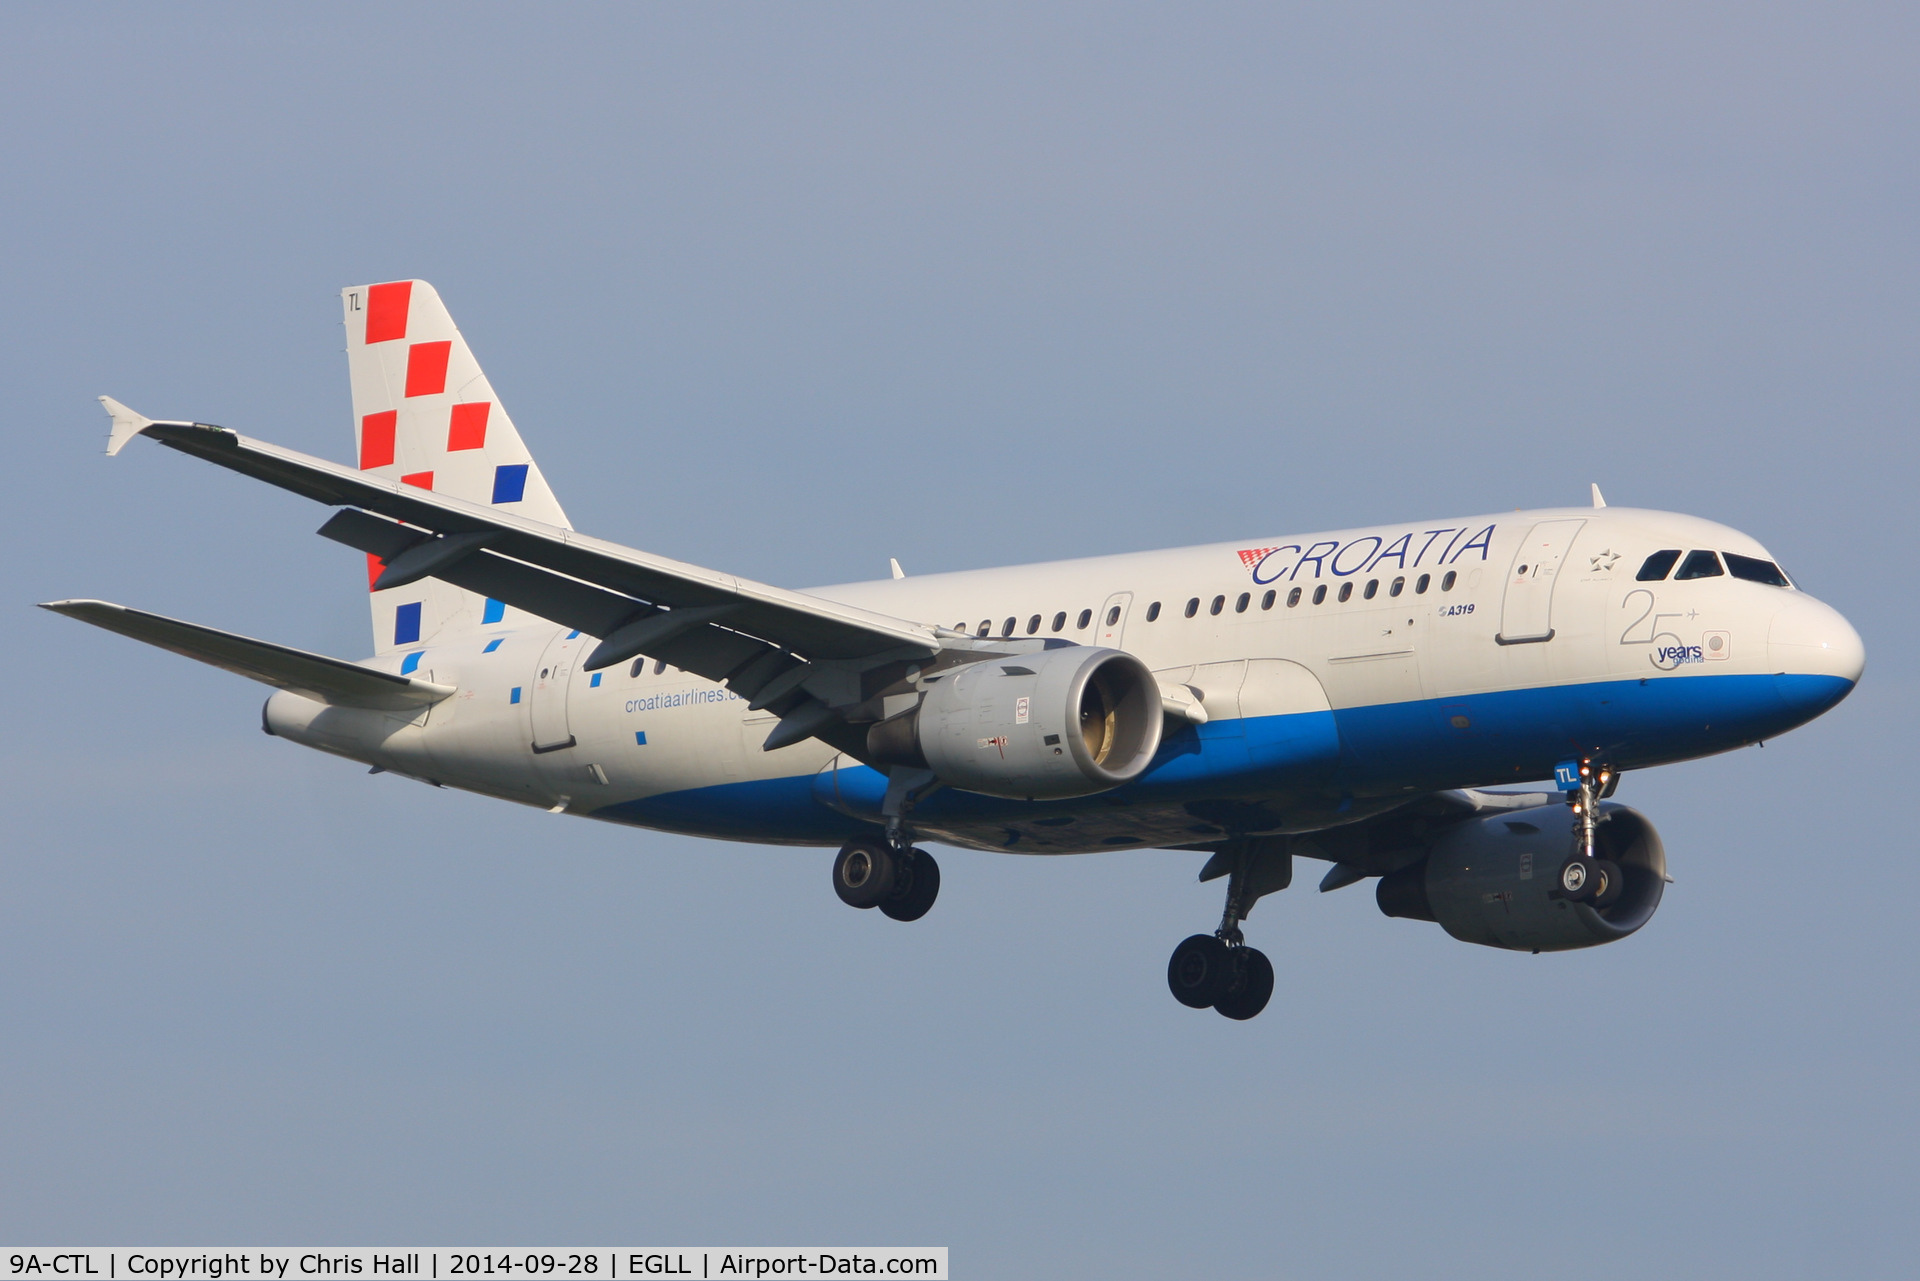 9A-CTL, 2000 Airbus A319-112 C/N 1252, Croatia Airlines